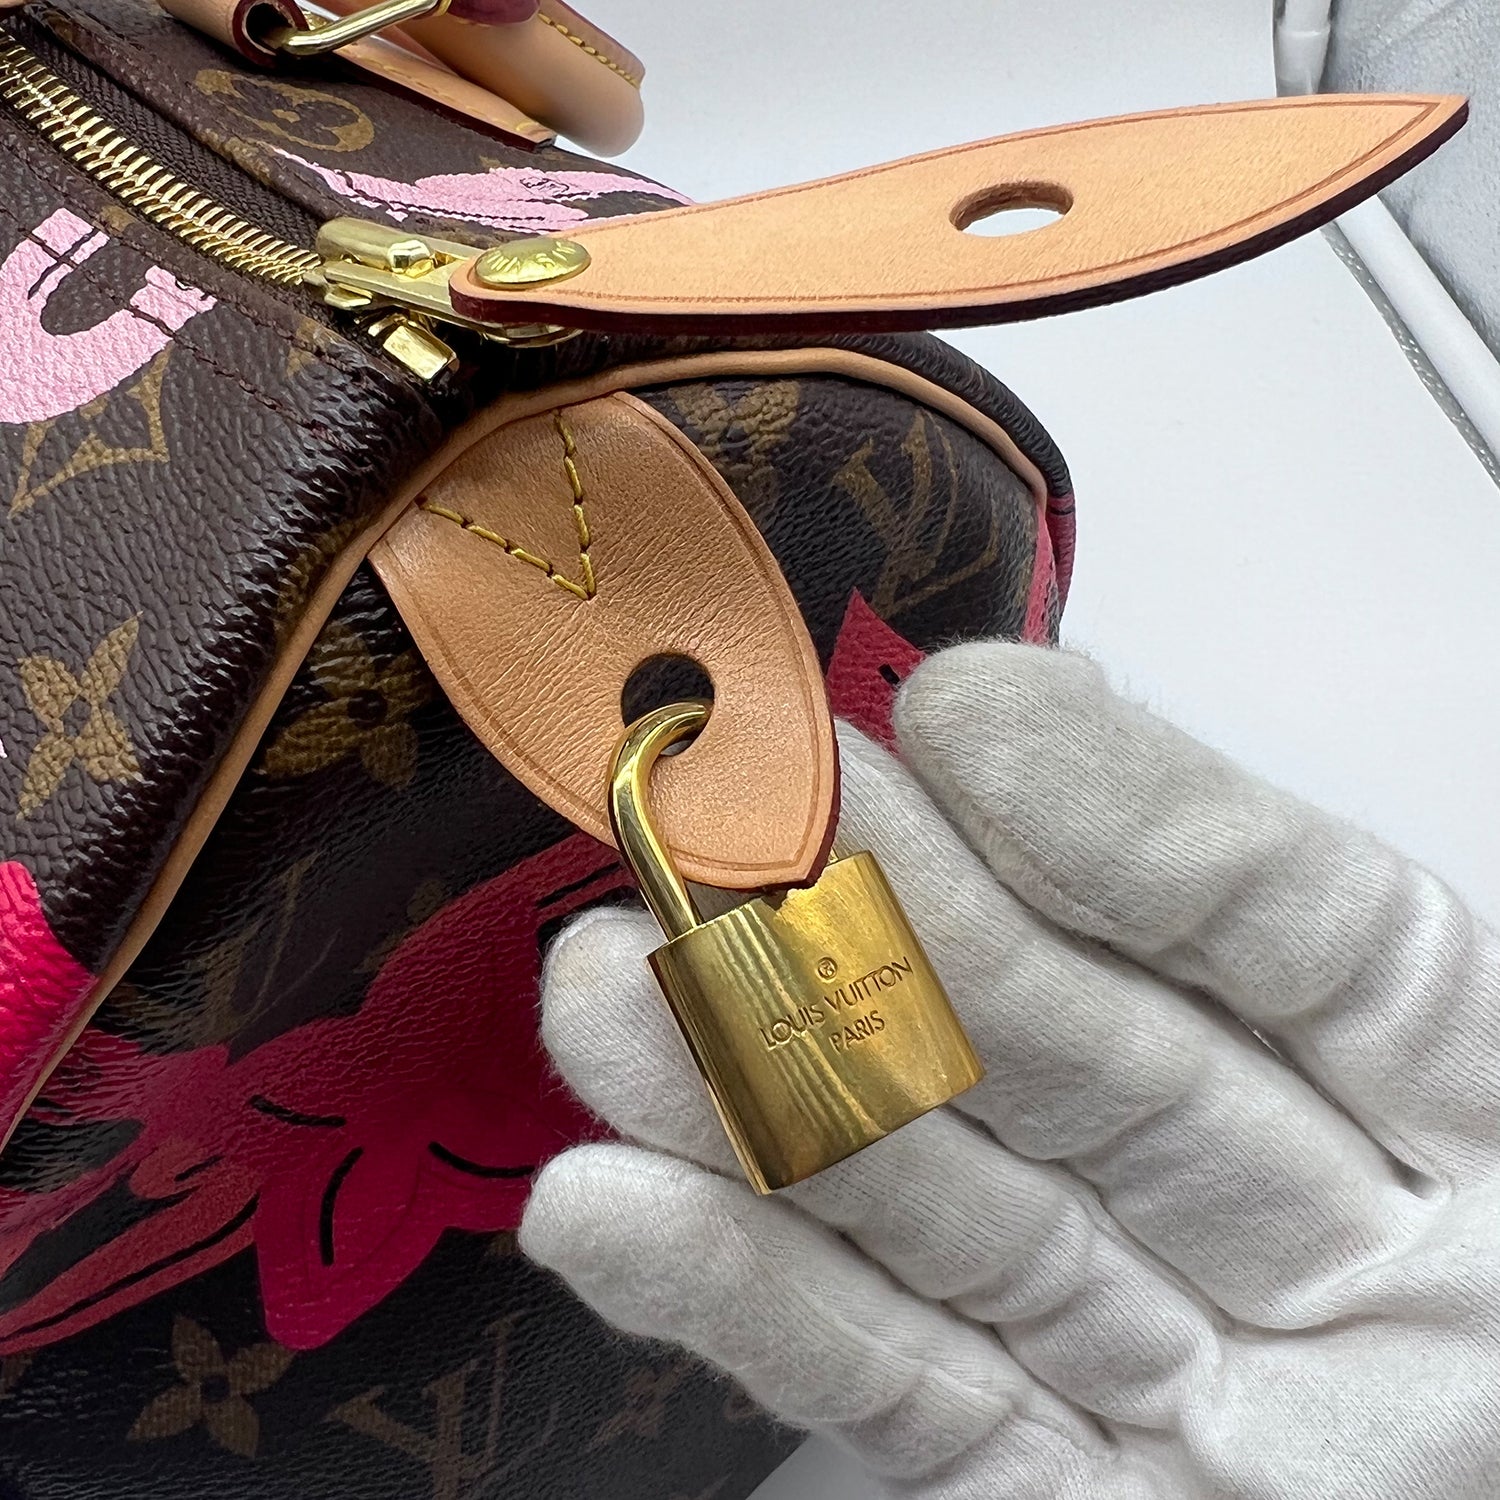 Limited Editions Louis Vuitton Bags - Red Rose Paris